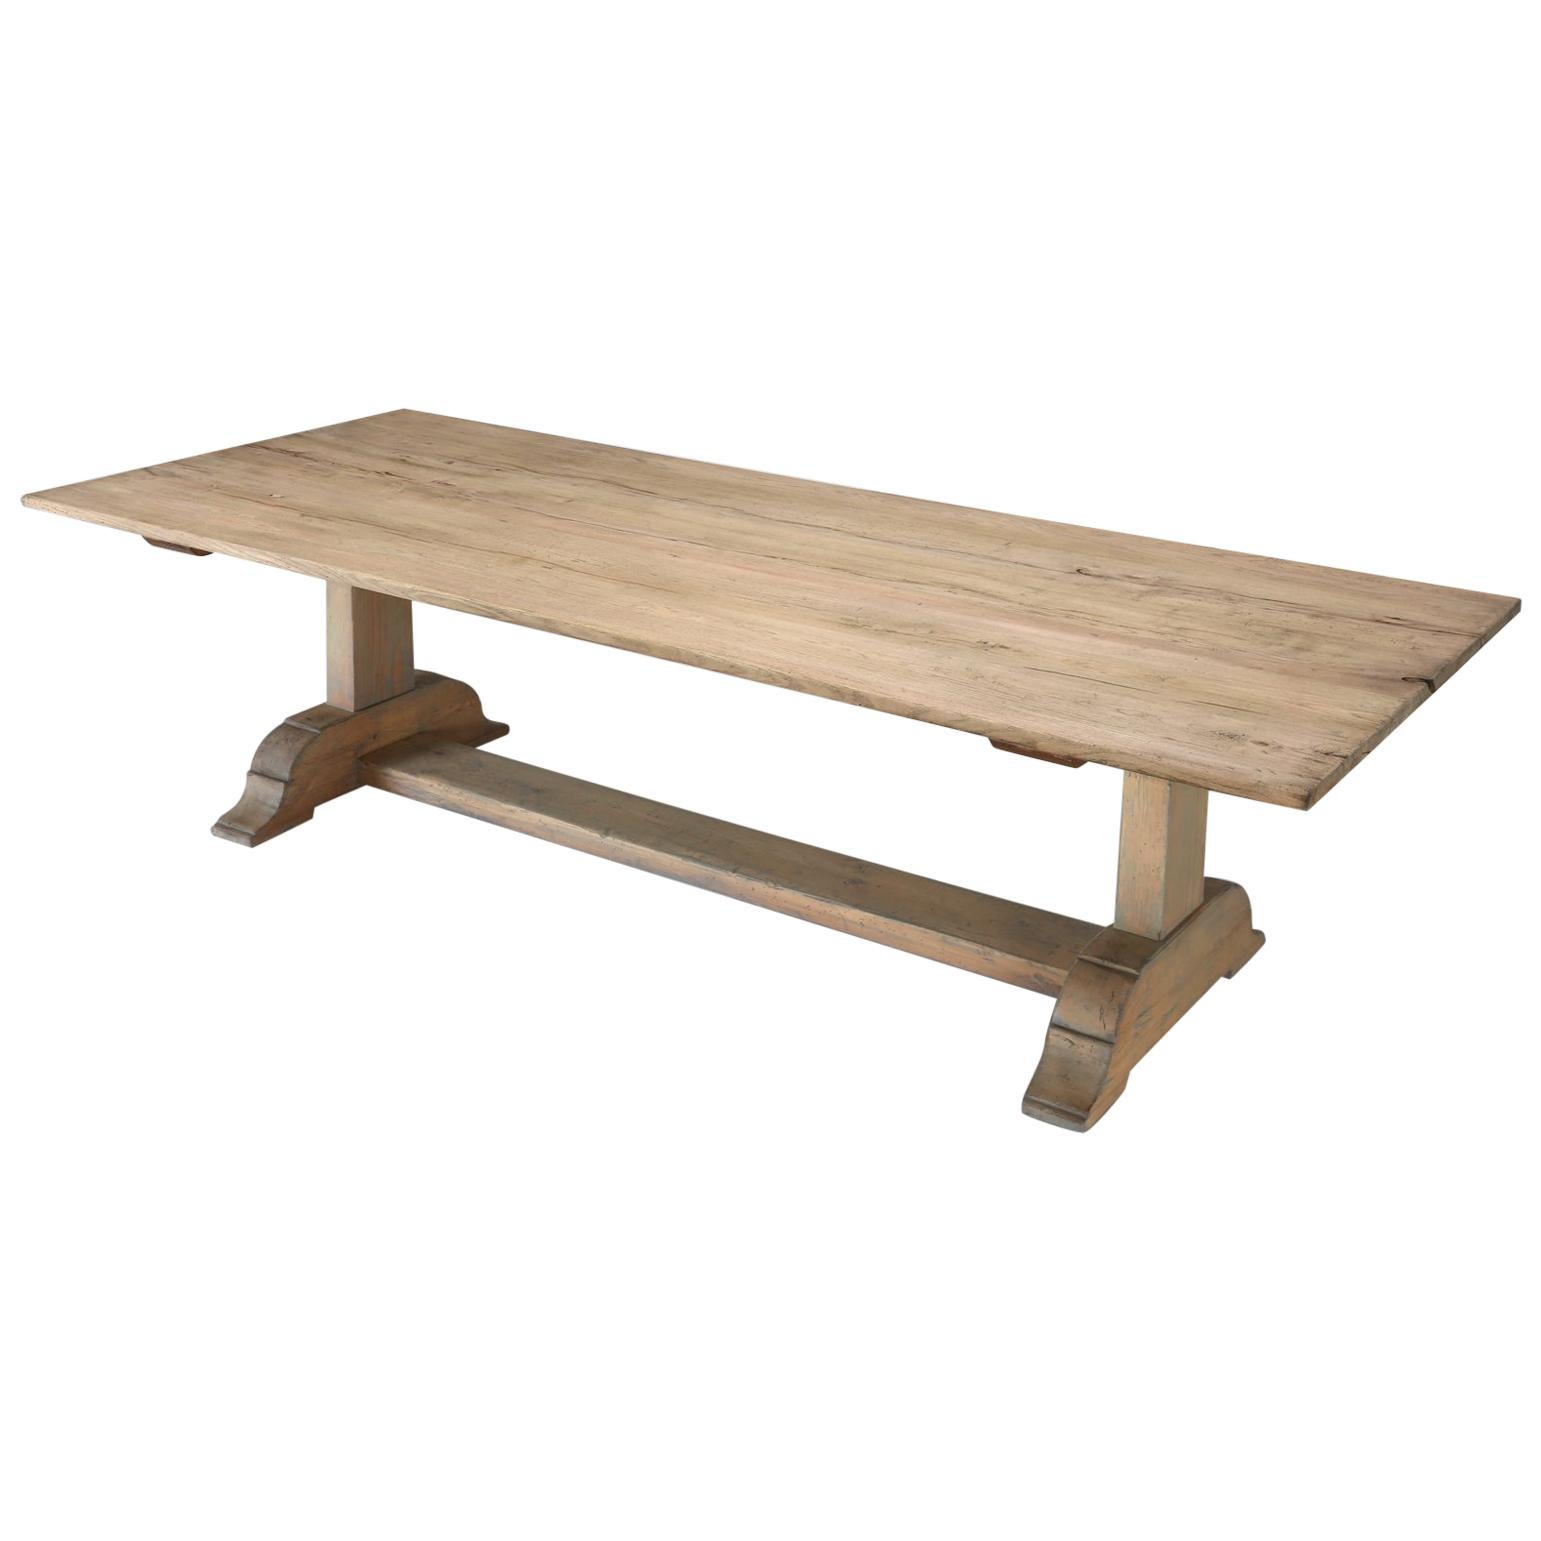 Italian Style Reclaimed White Oak Trestle Dining Table Available Any Dimension For Sale